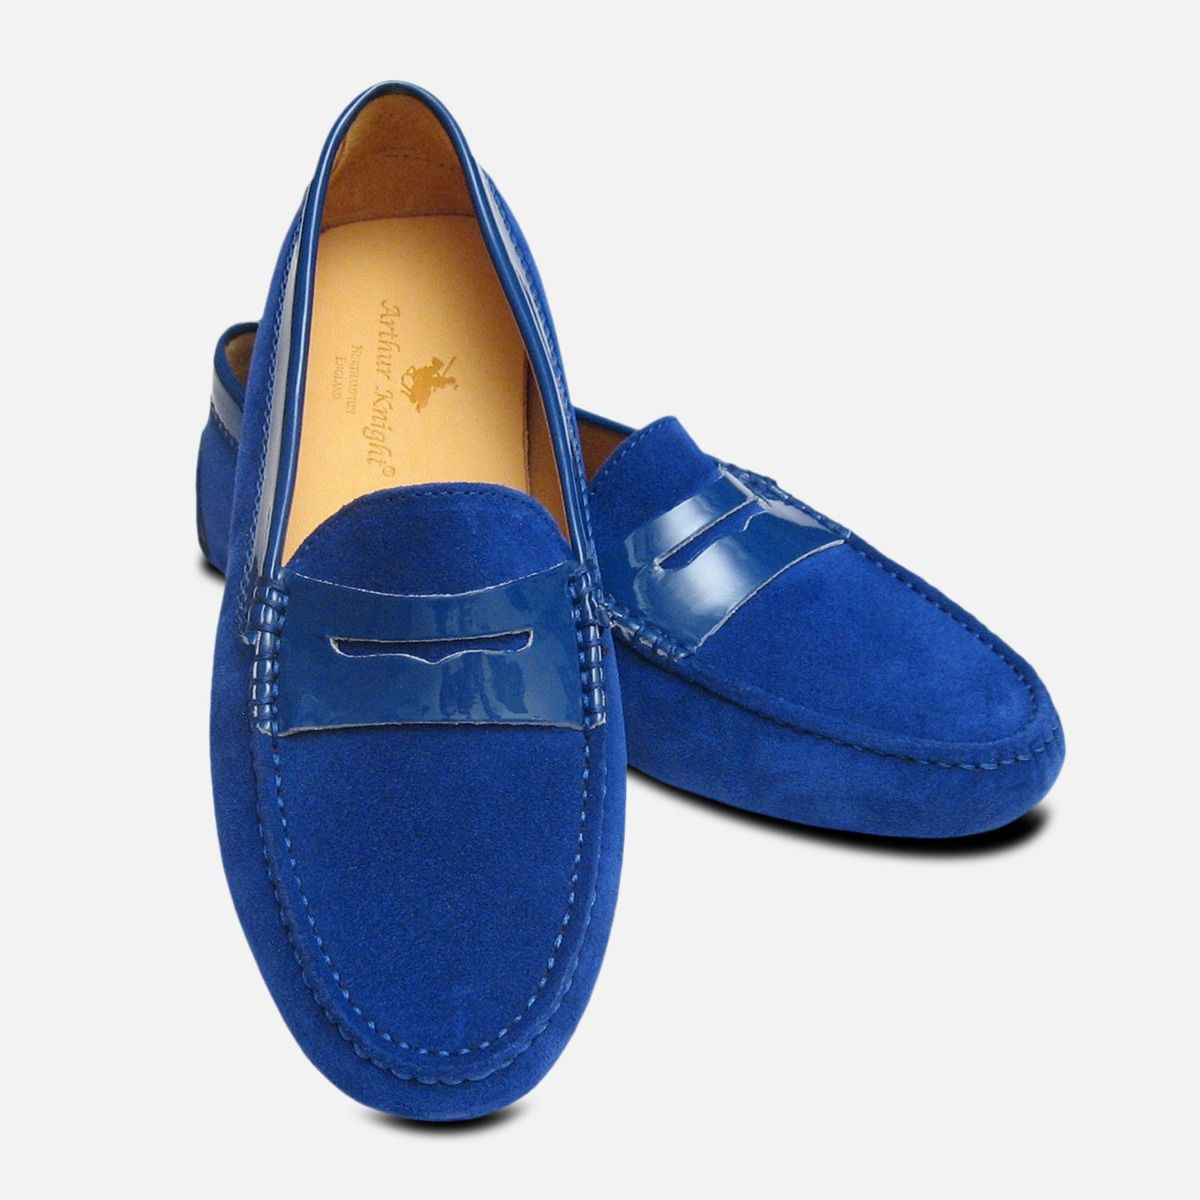 Electric Blue Suede Patent Arthur Knight Ladies Italian Driving